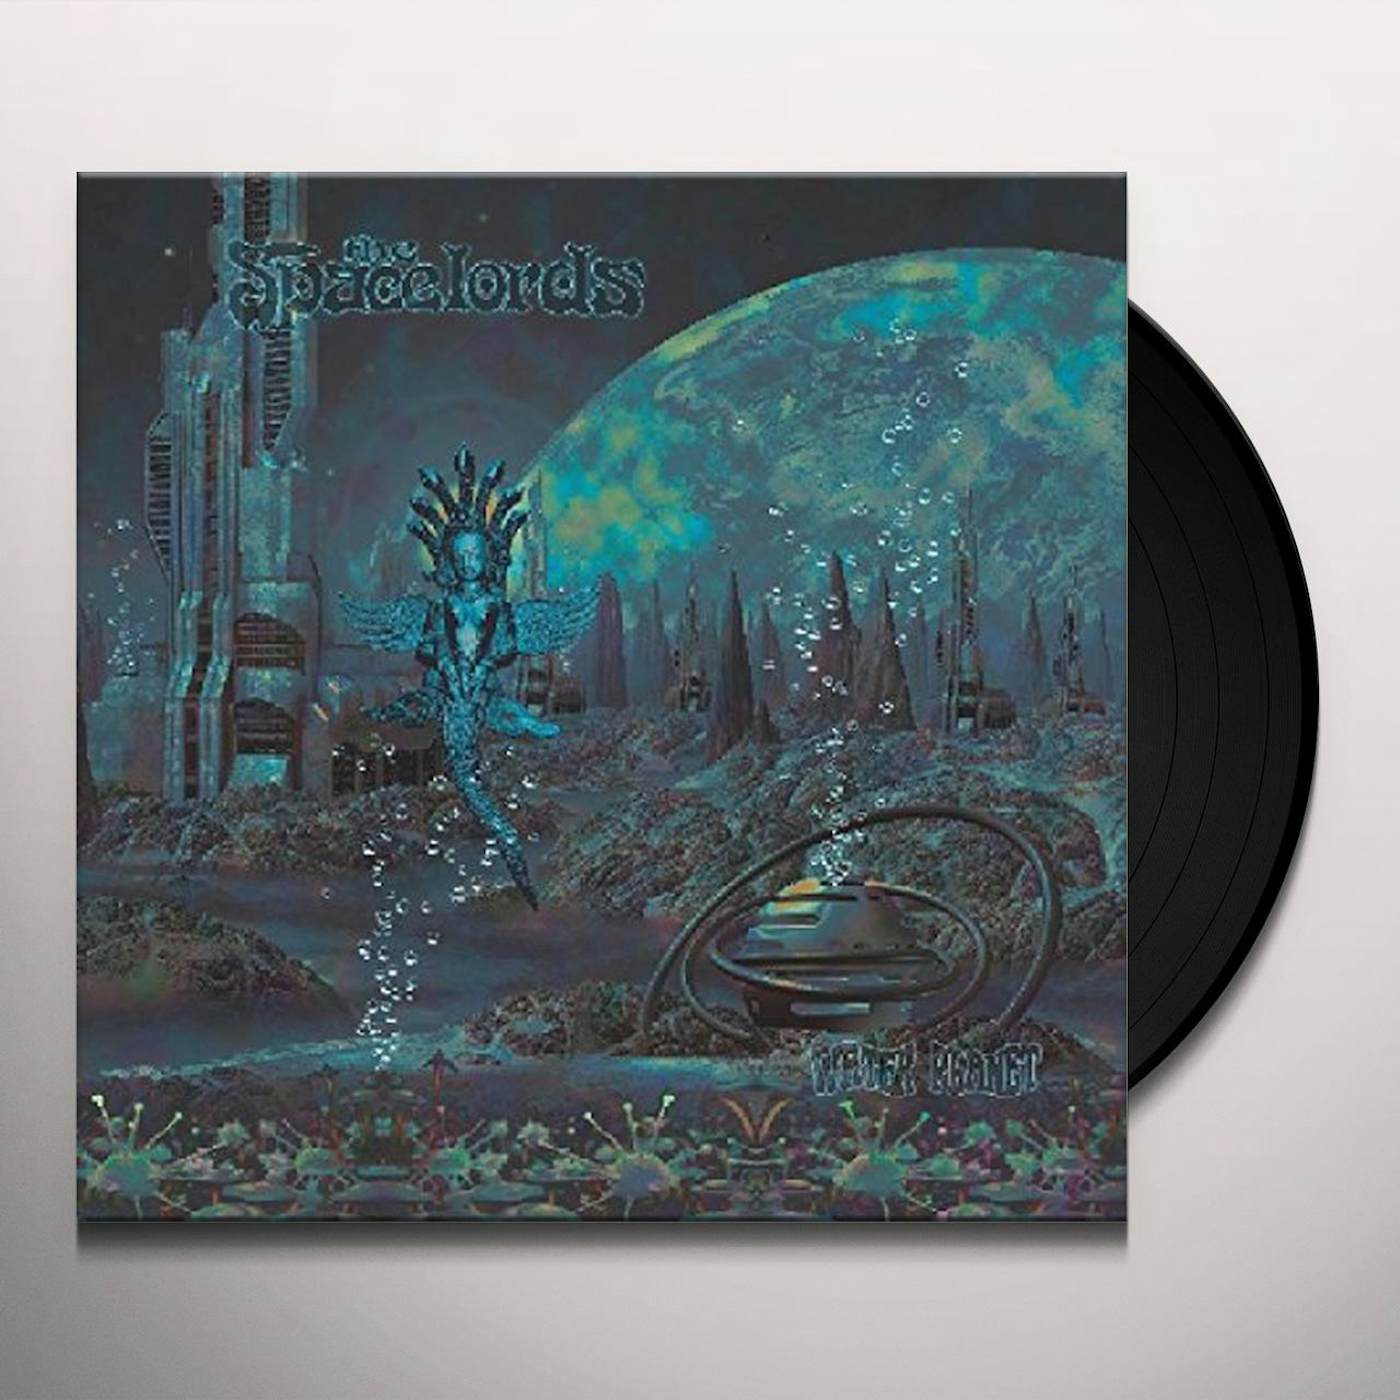 Spacelords Water Planet Vinyl Record